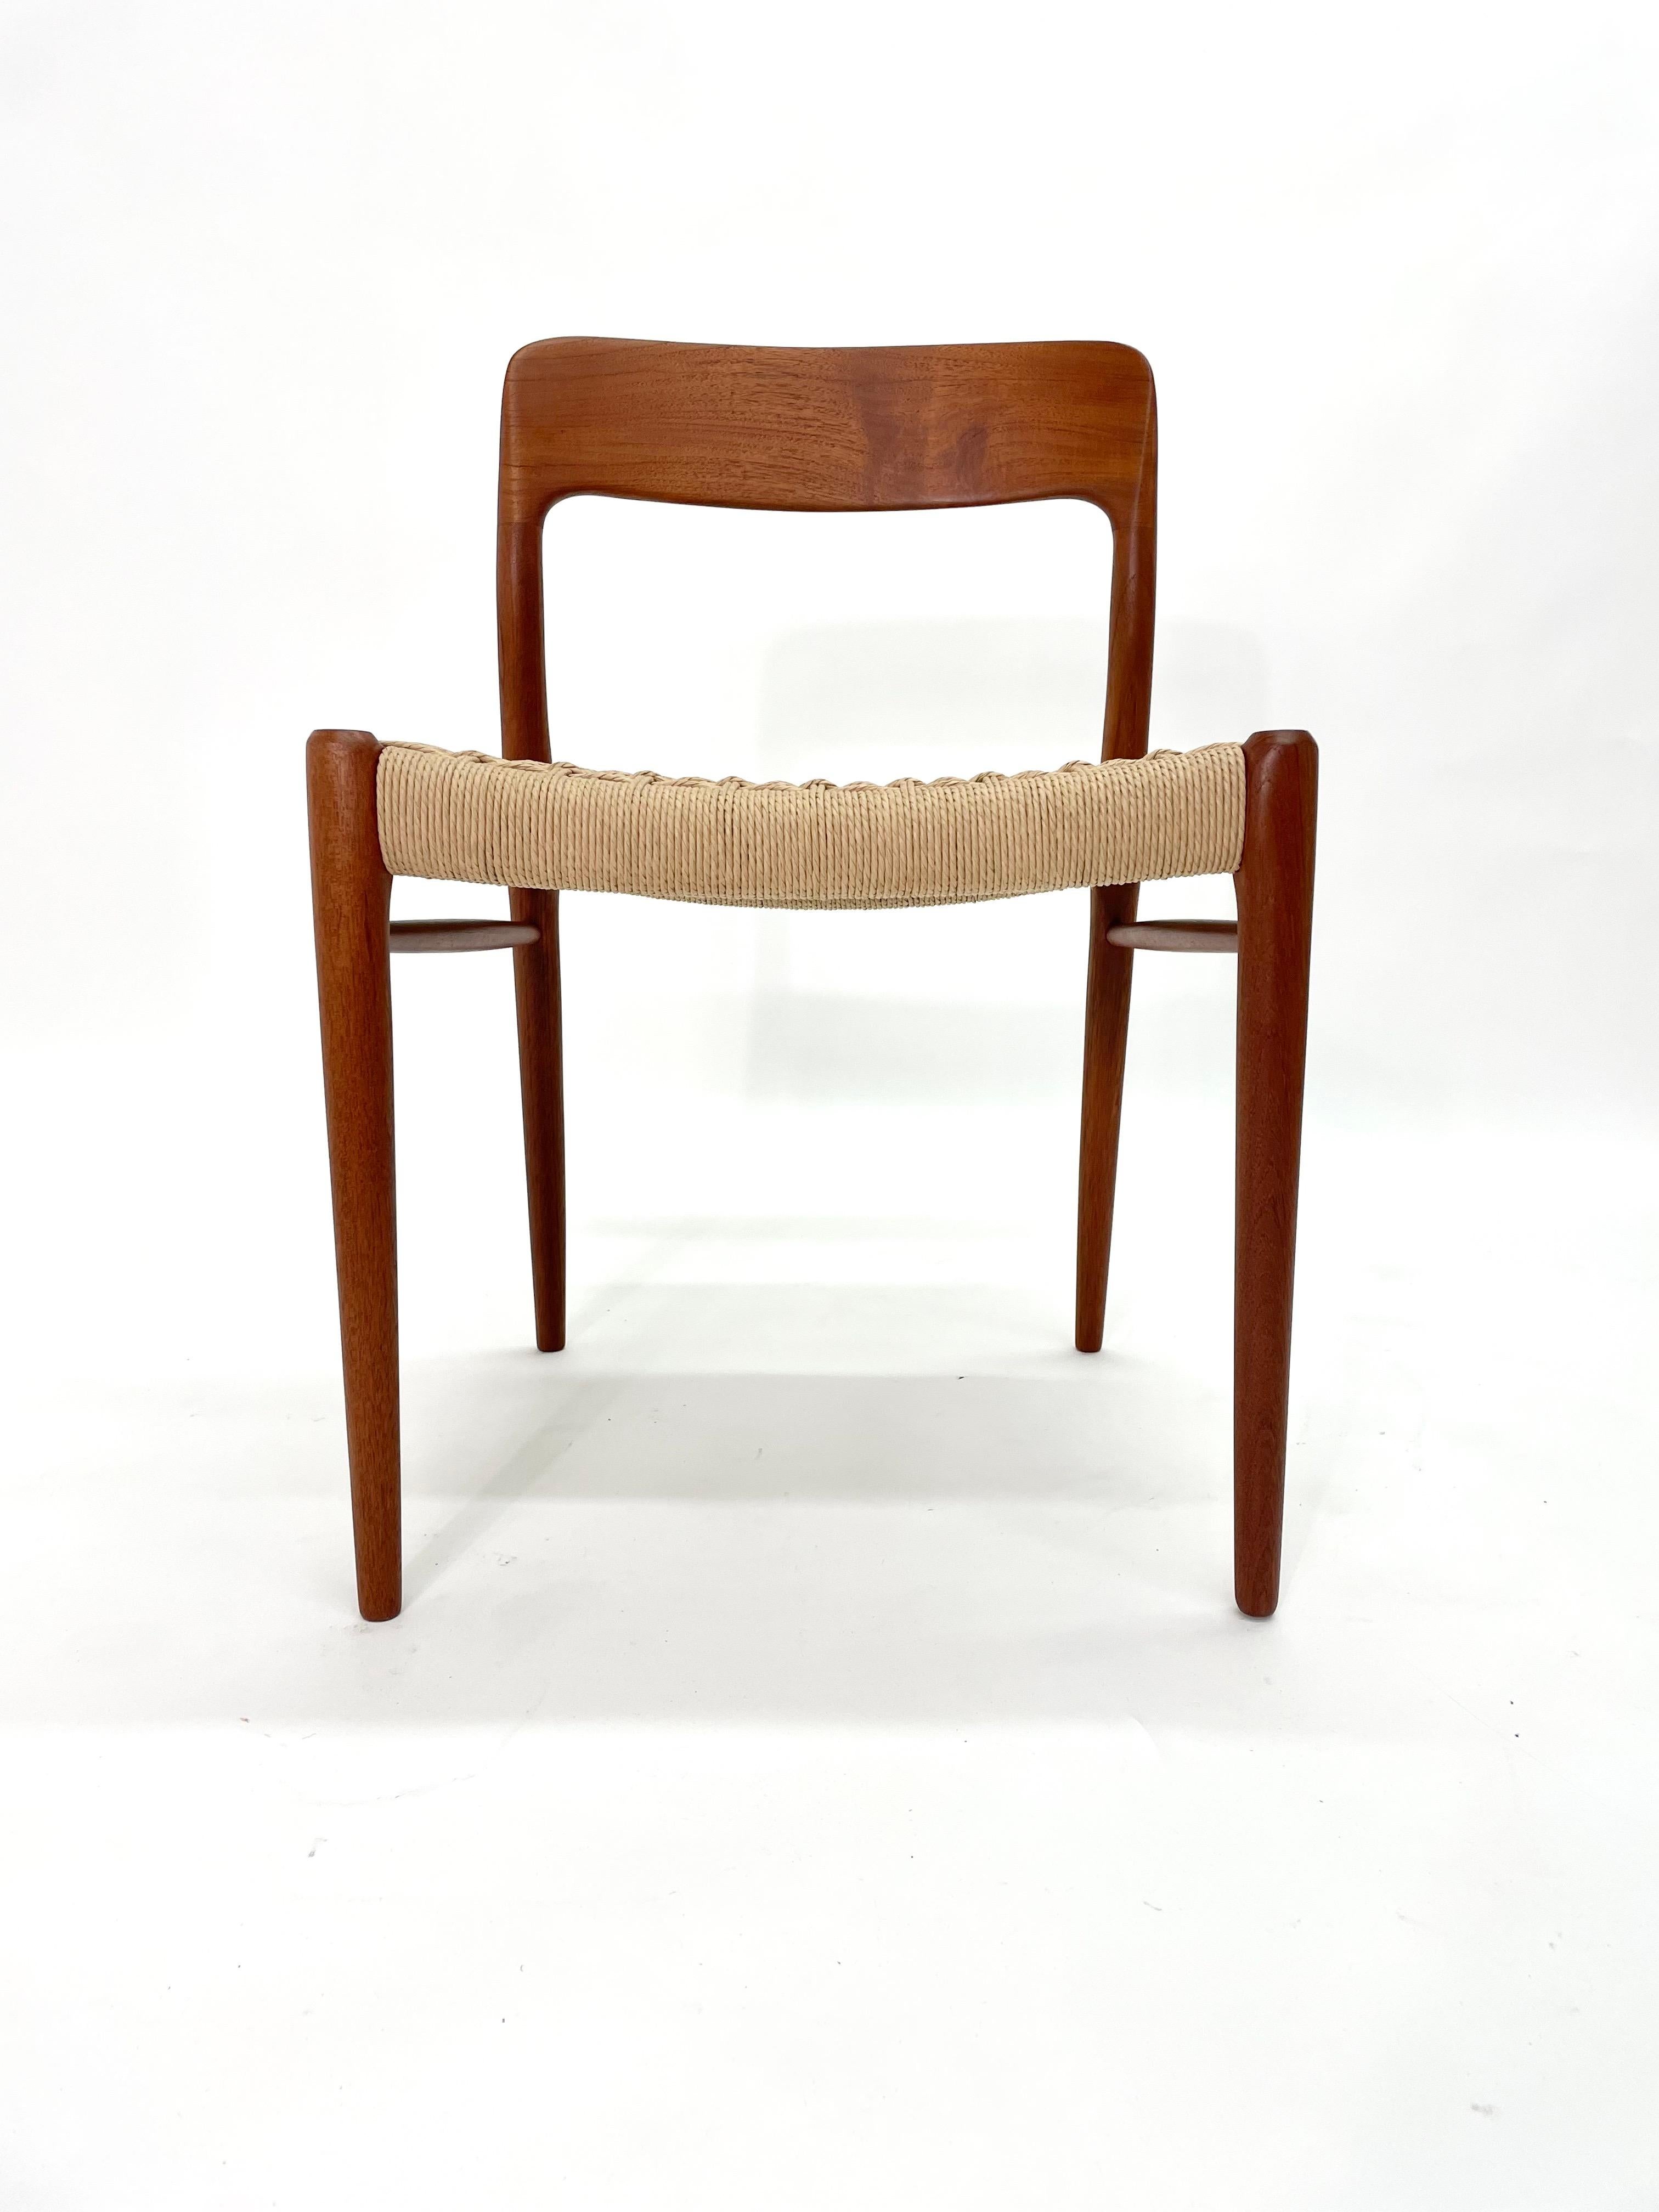 A beautiful set of eight 1960s teak dining chairs – model 71 – designed by Niels Otto Møller for his own company J.L. Møller Møbelfabrik Denmark.

The Model 71 was designed in 1951 and was one of Moller’s first designs, which remains an all-time